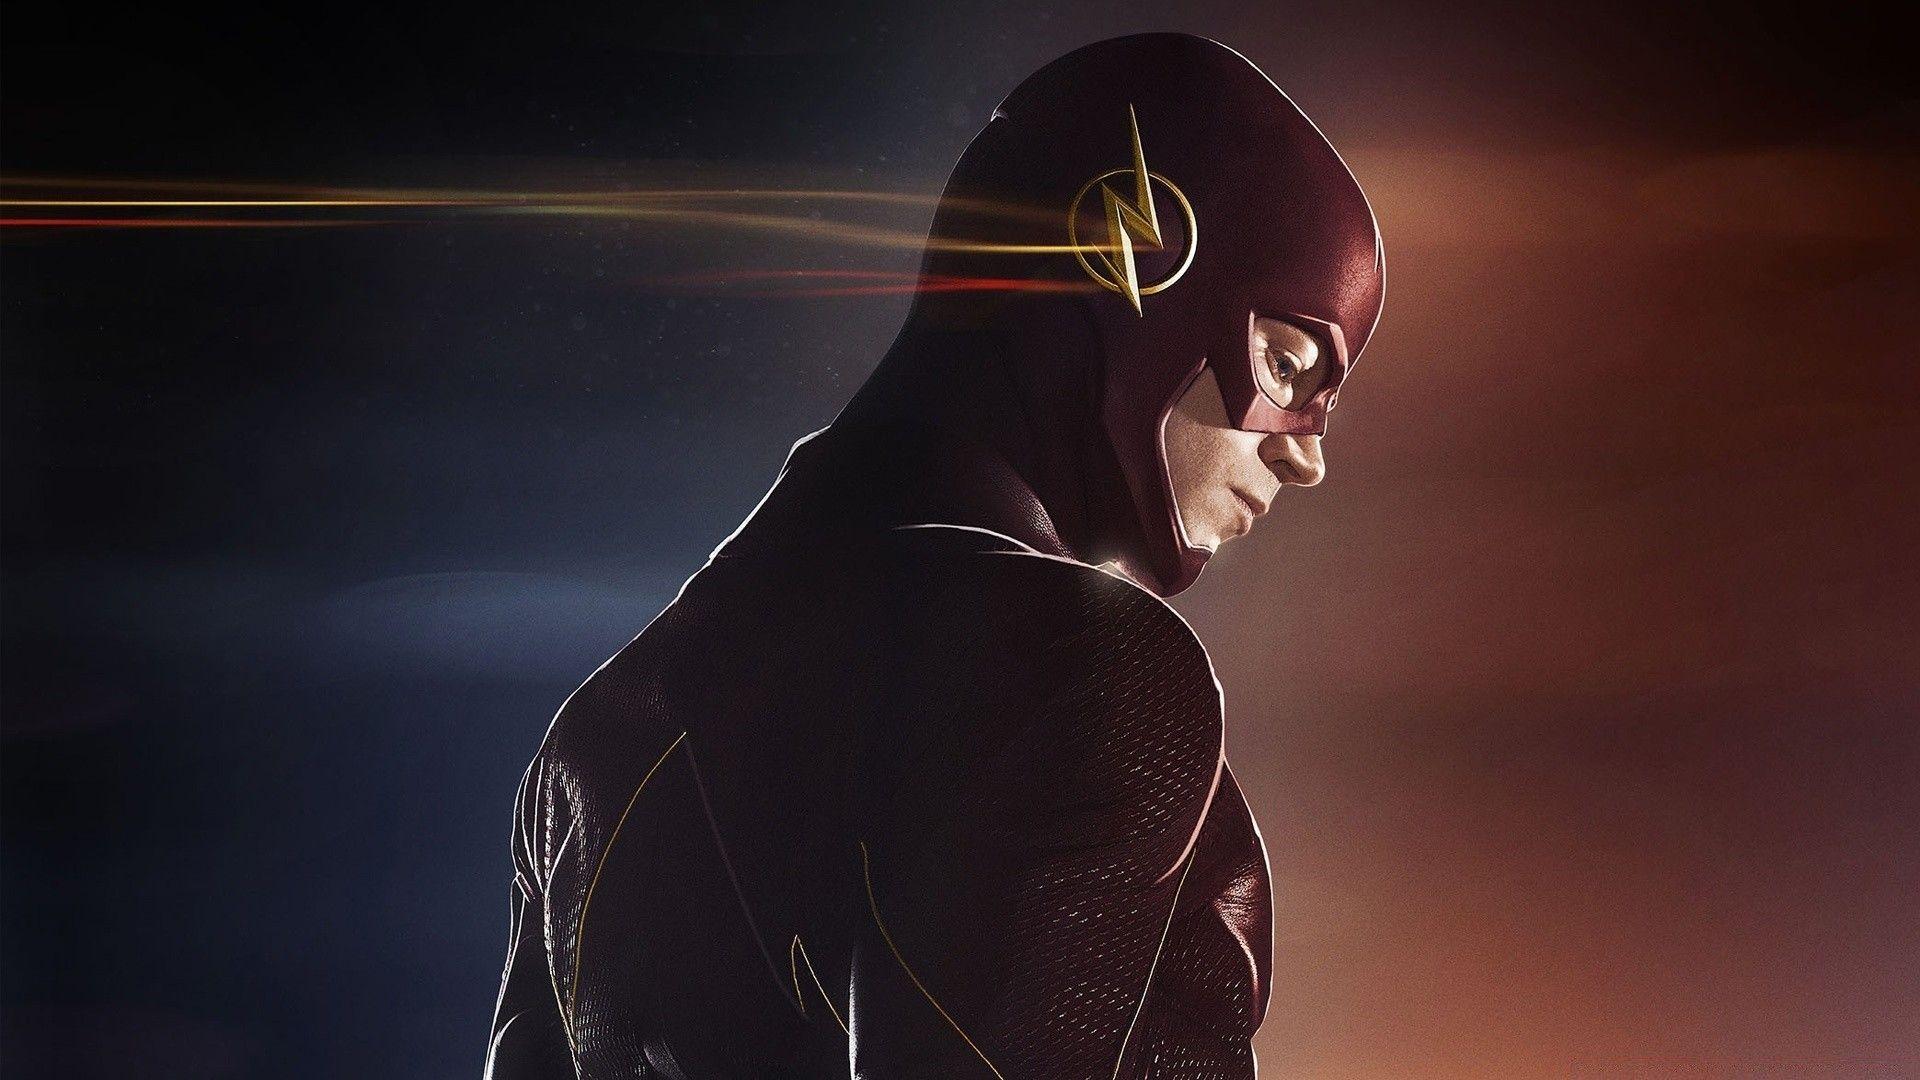 The Flash CW. Android wallpaper for free